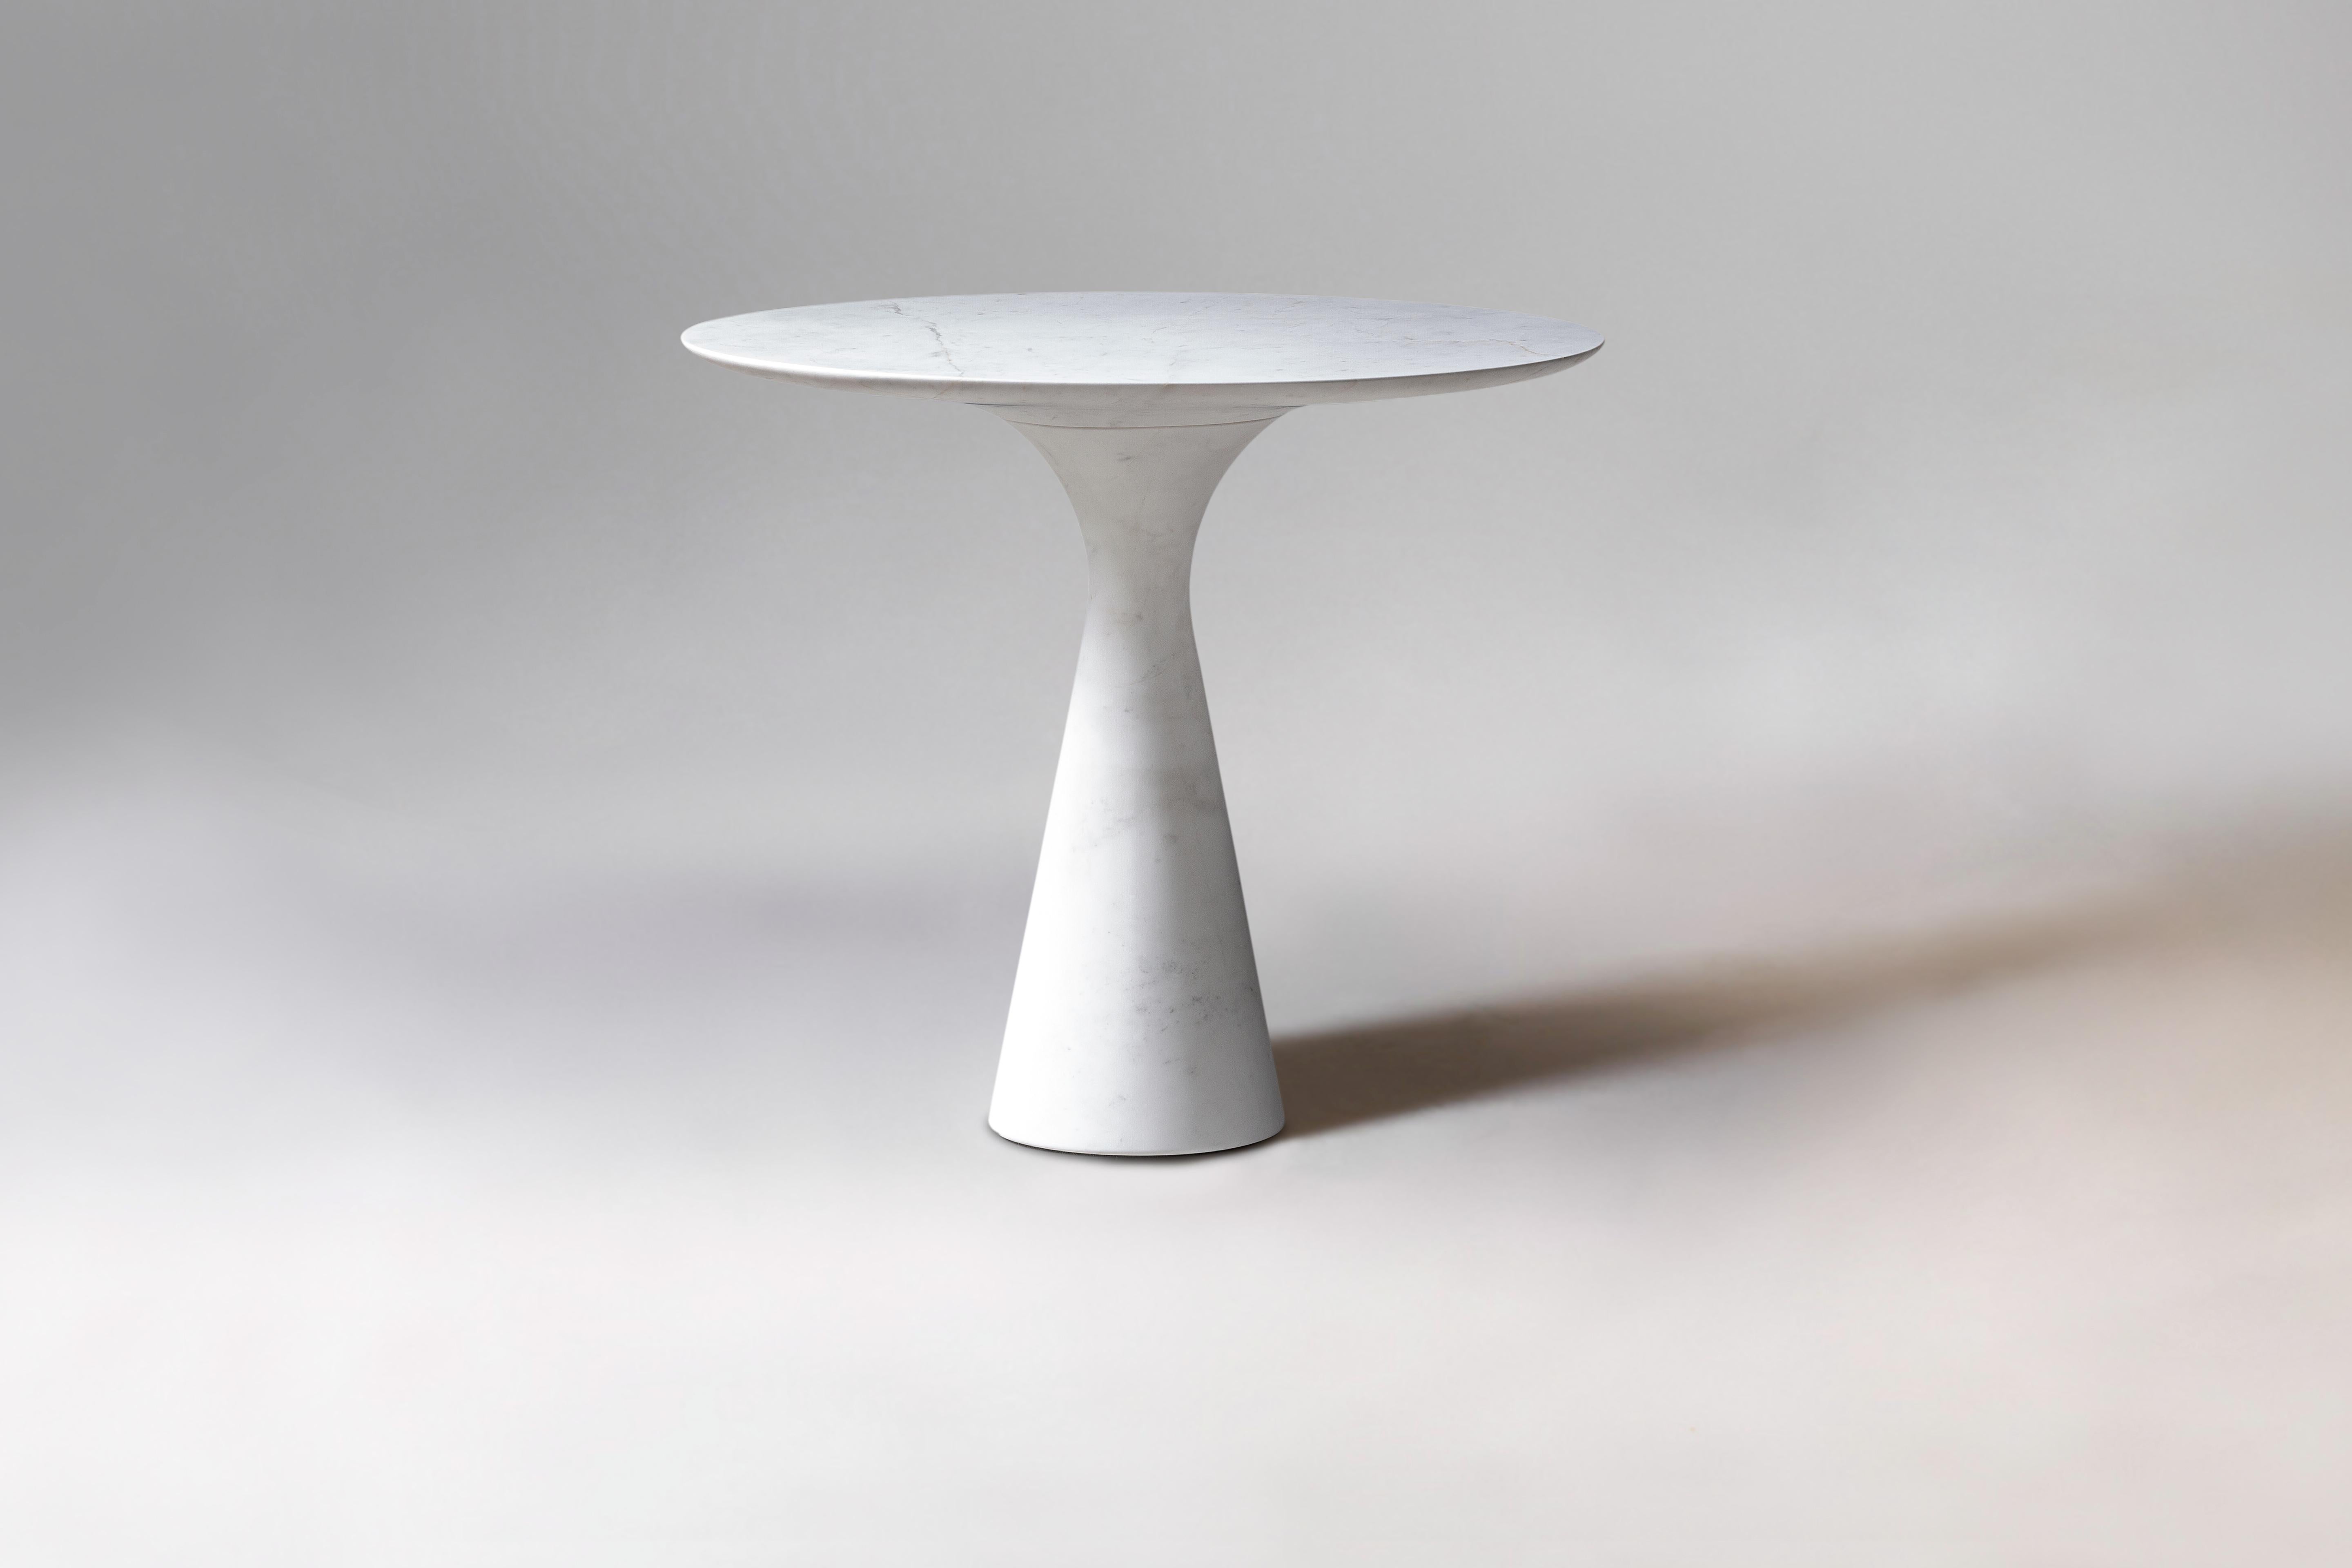 Kynos refined contemporary marble side table 62/45.
Dimensions: diameter 45 x height 62 cm.
Materials: Kynos

Angelo is the essence of a round table in natural stone, a sculptural shape in robust material with elegant lines and refined